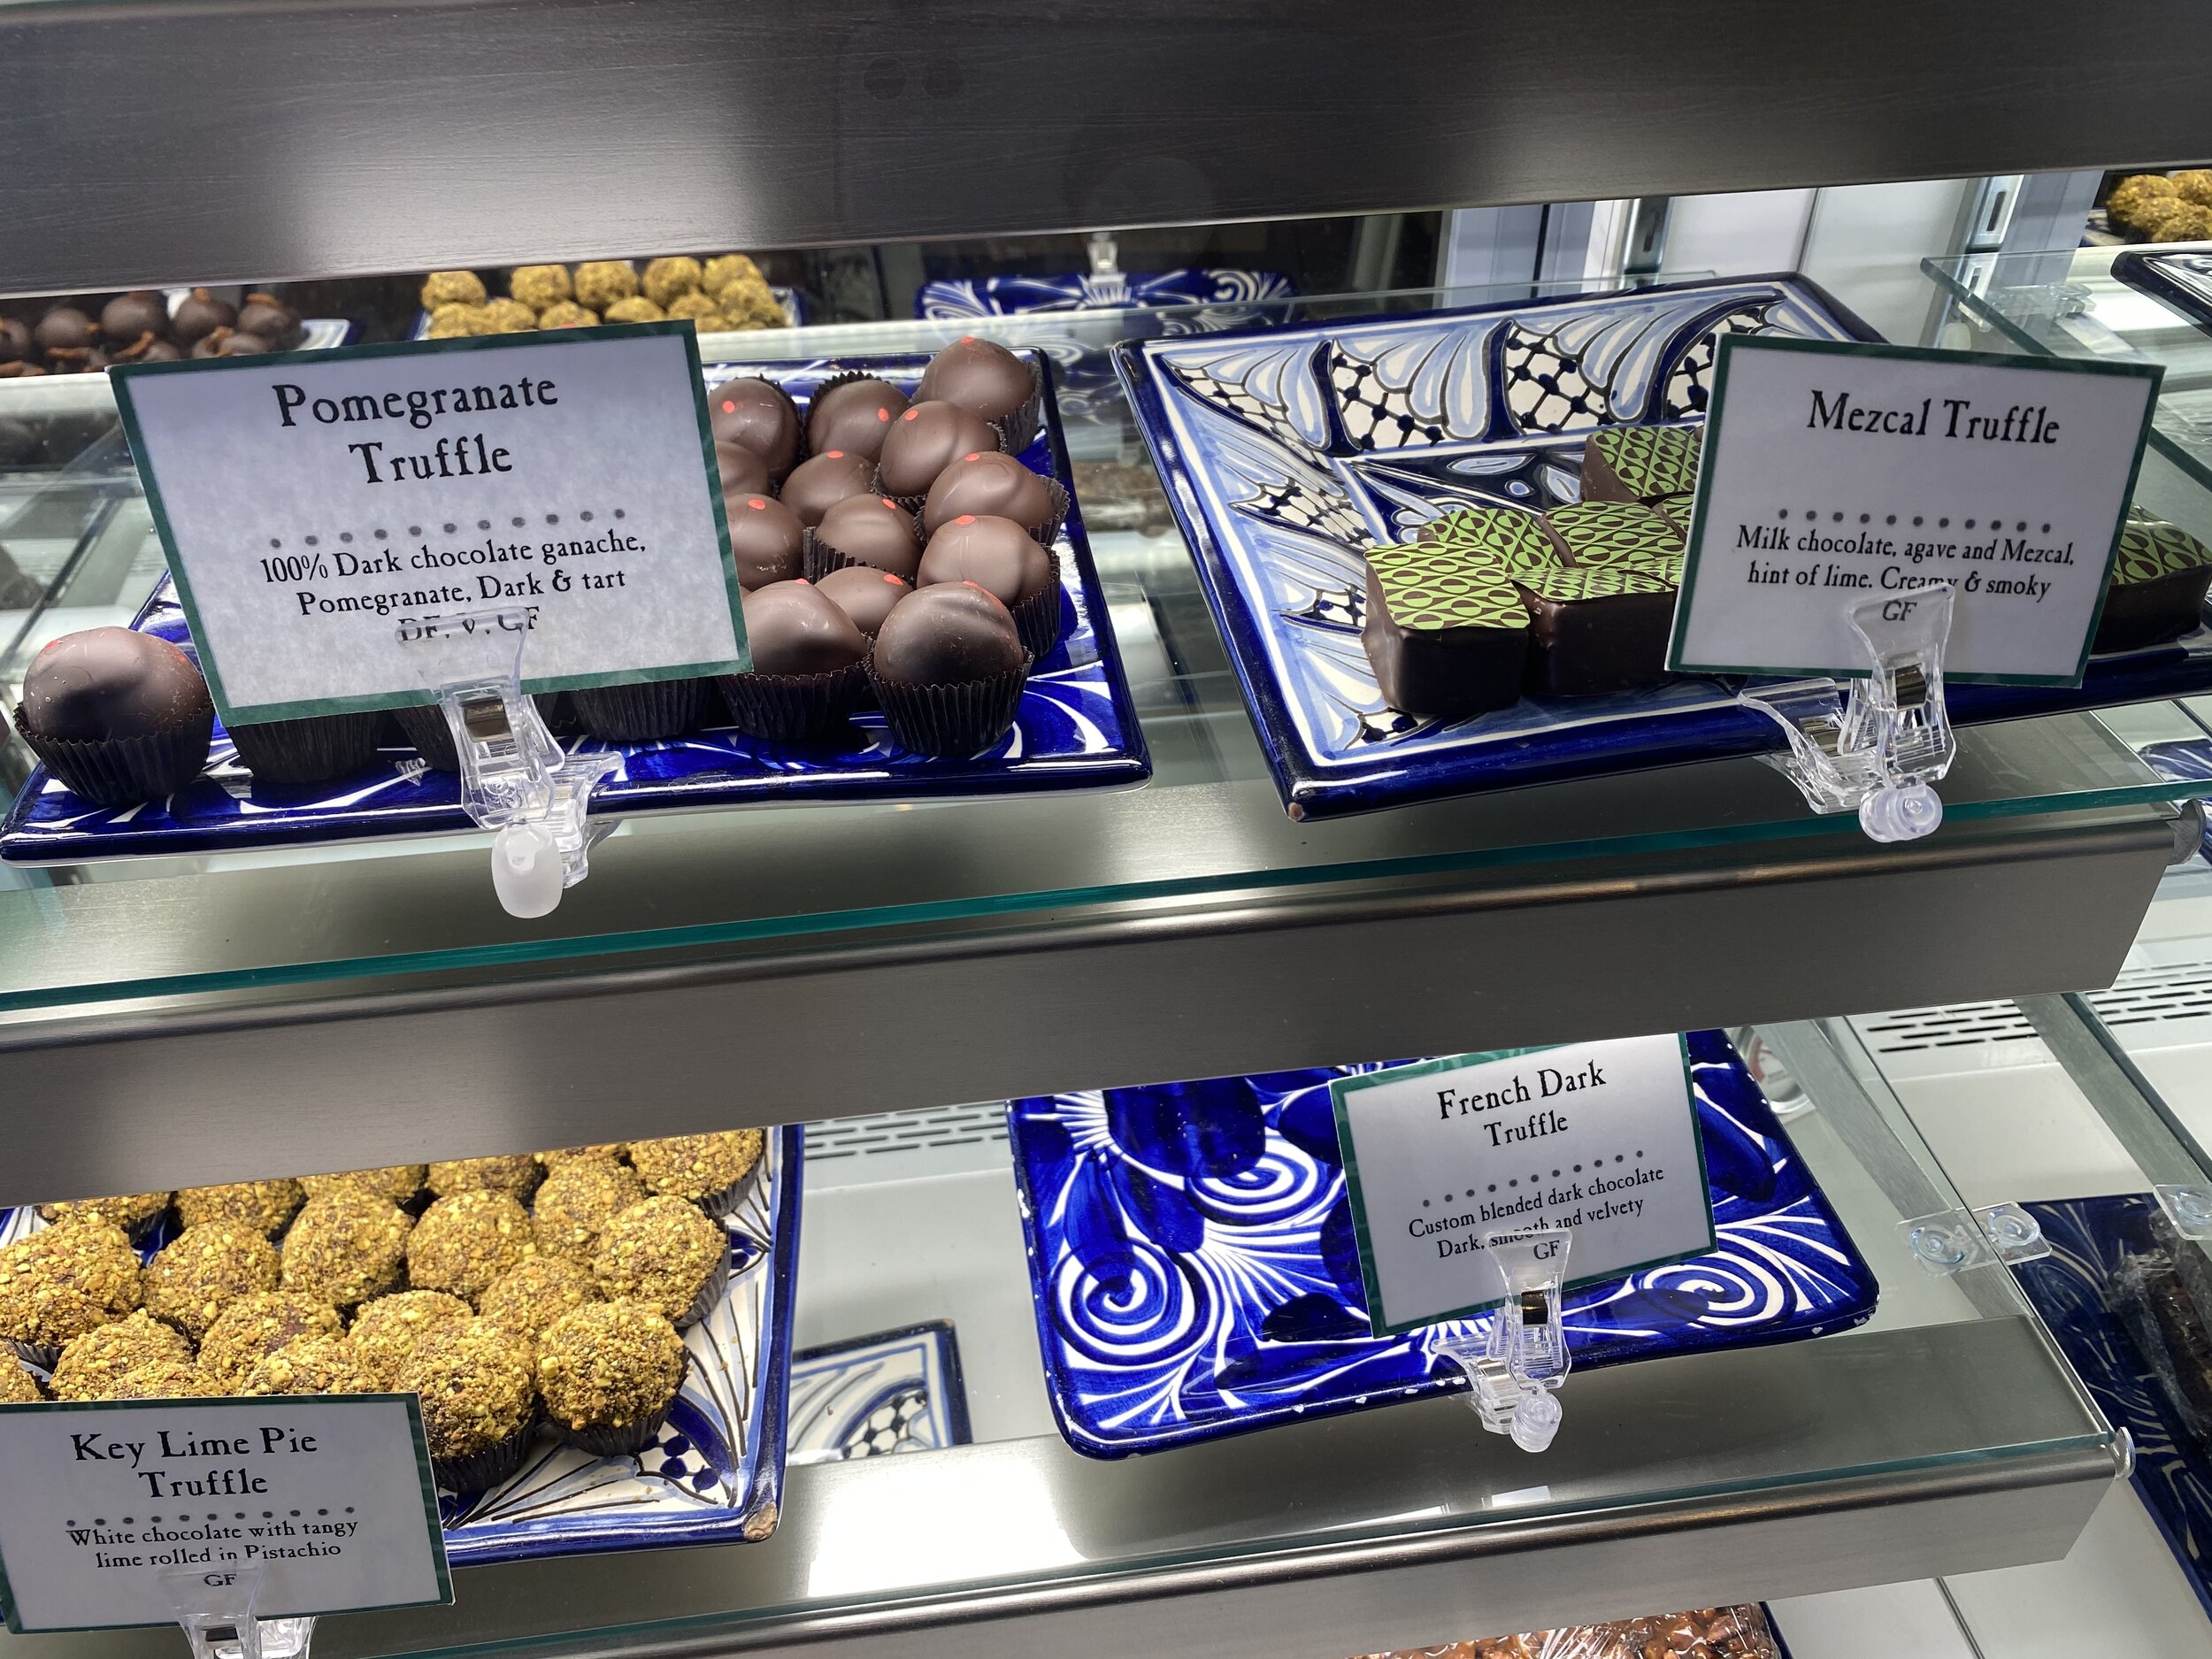 Display case of Southwestern-flavored chocolates